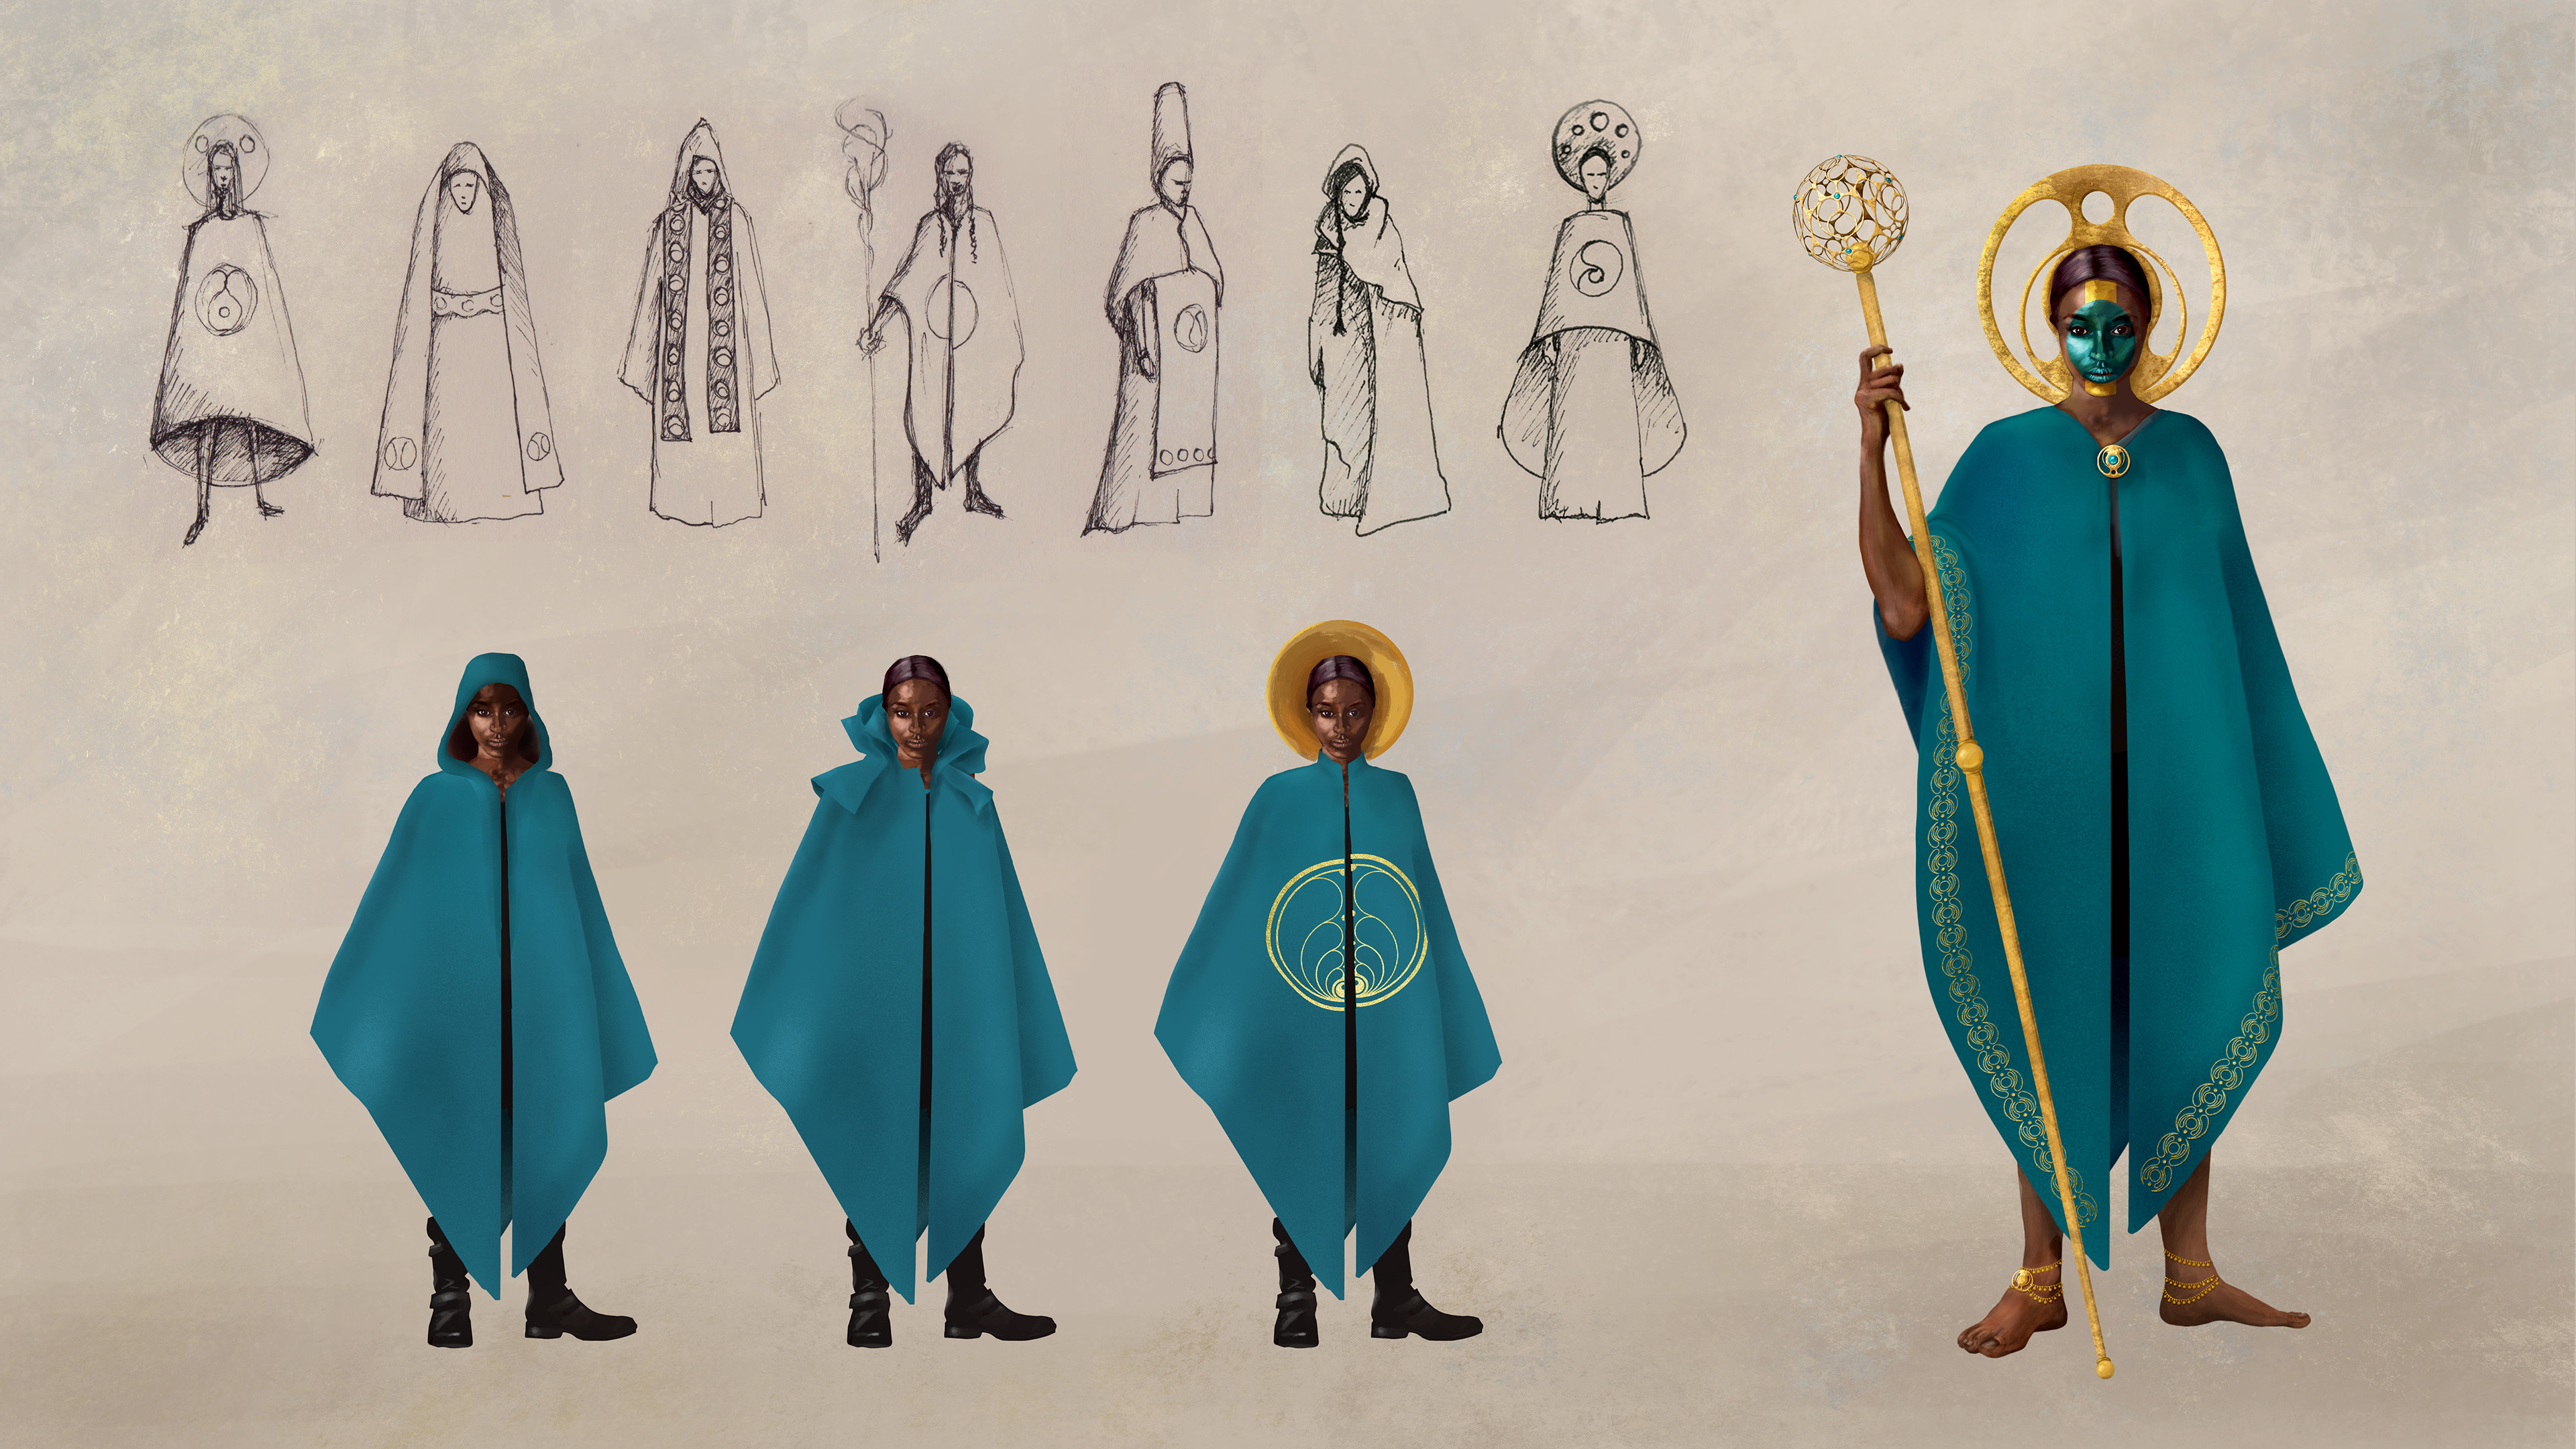 Initial Sketches and Early Exploration Alongside Final Concept.